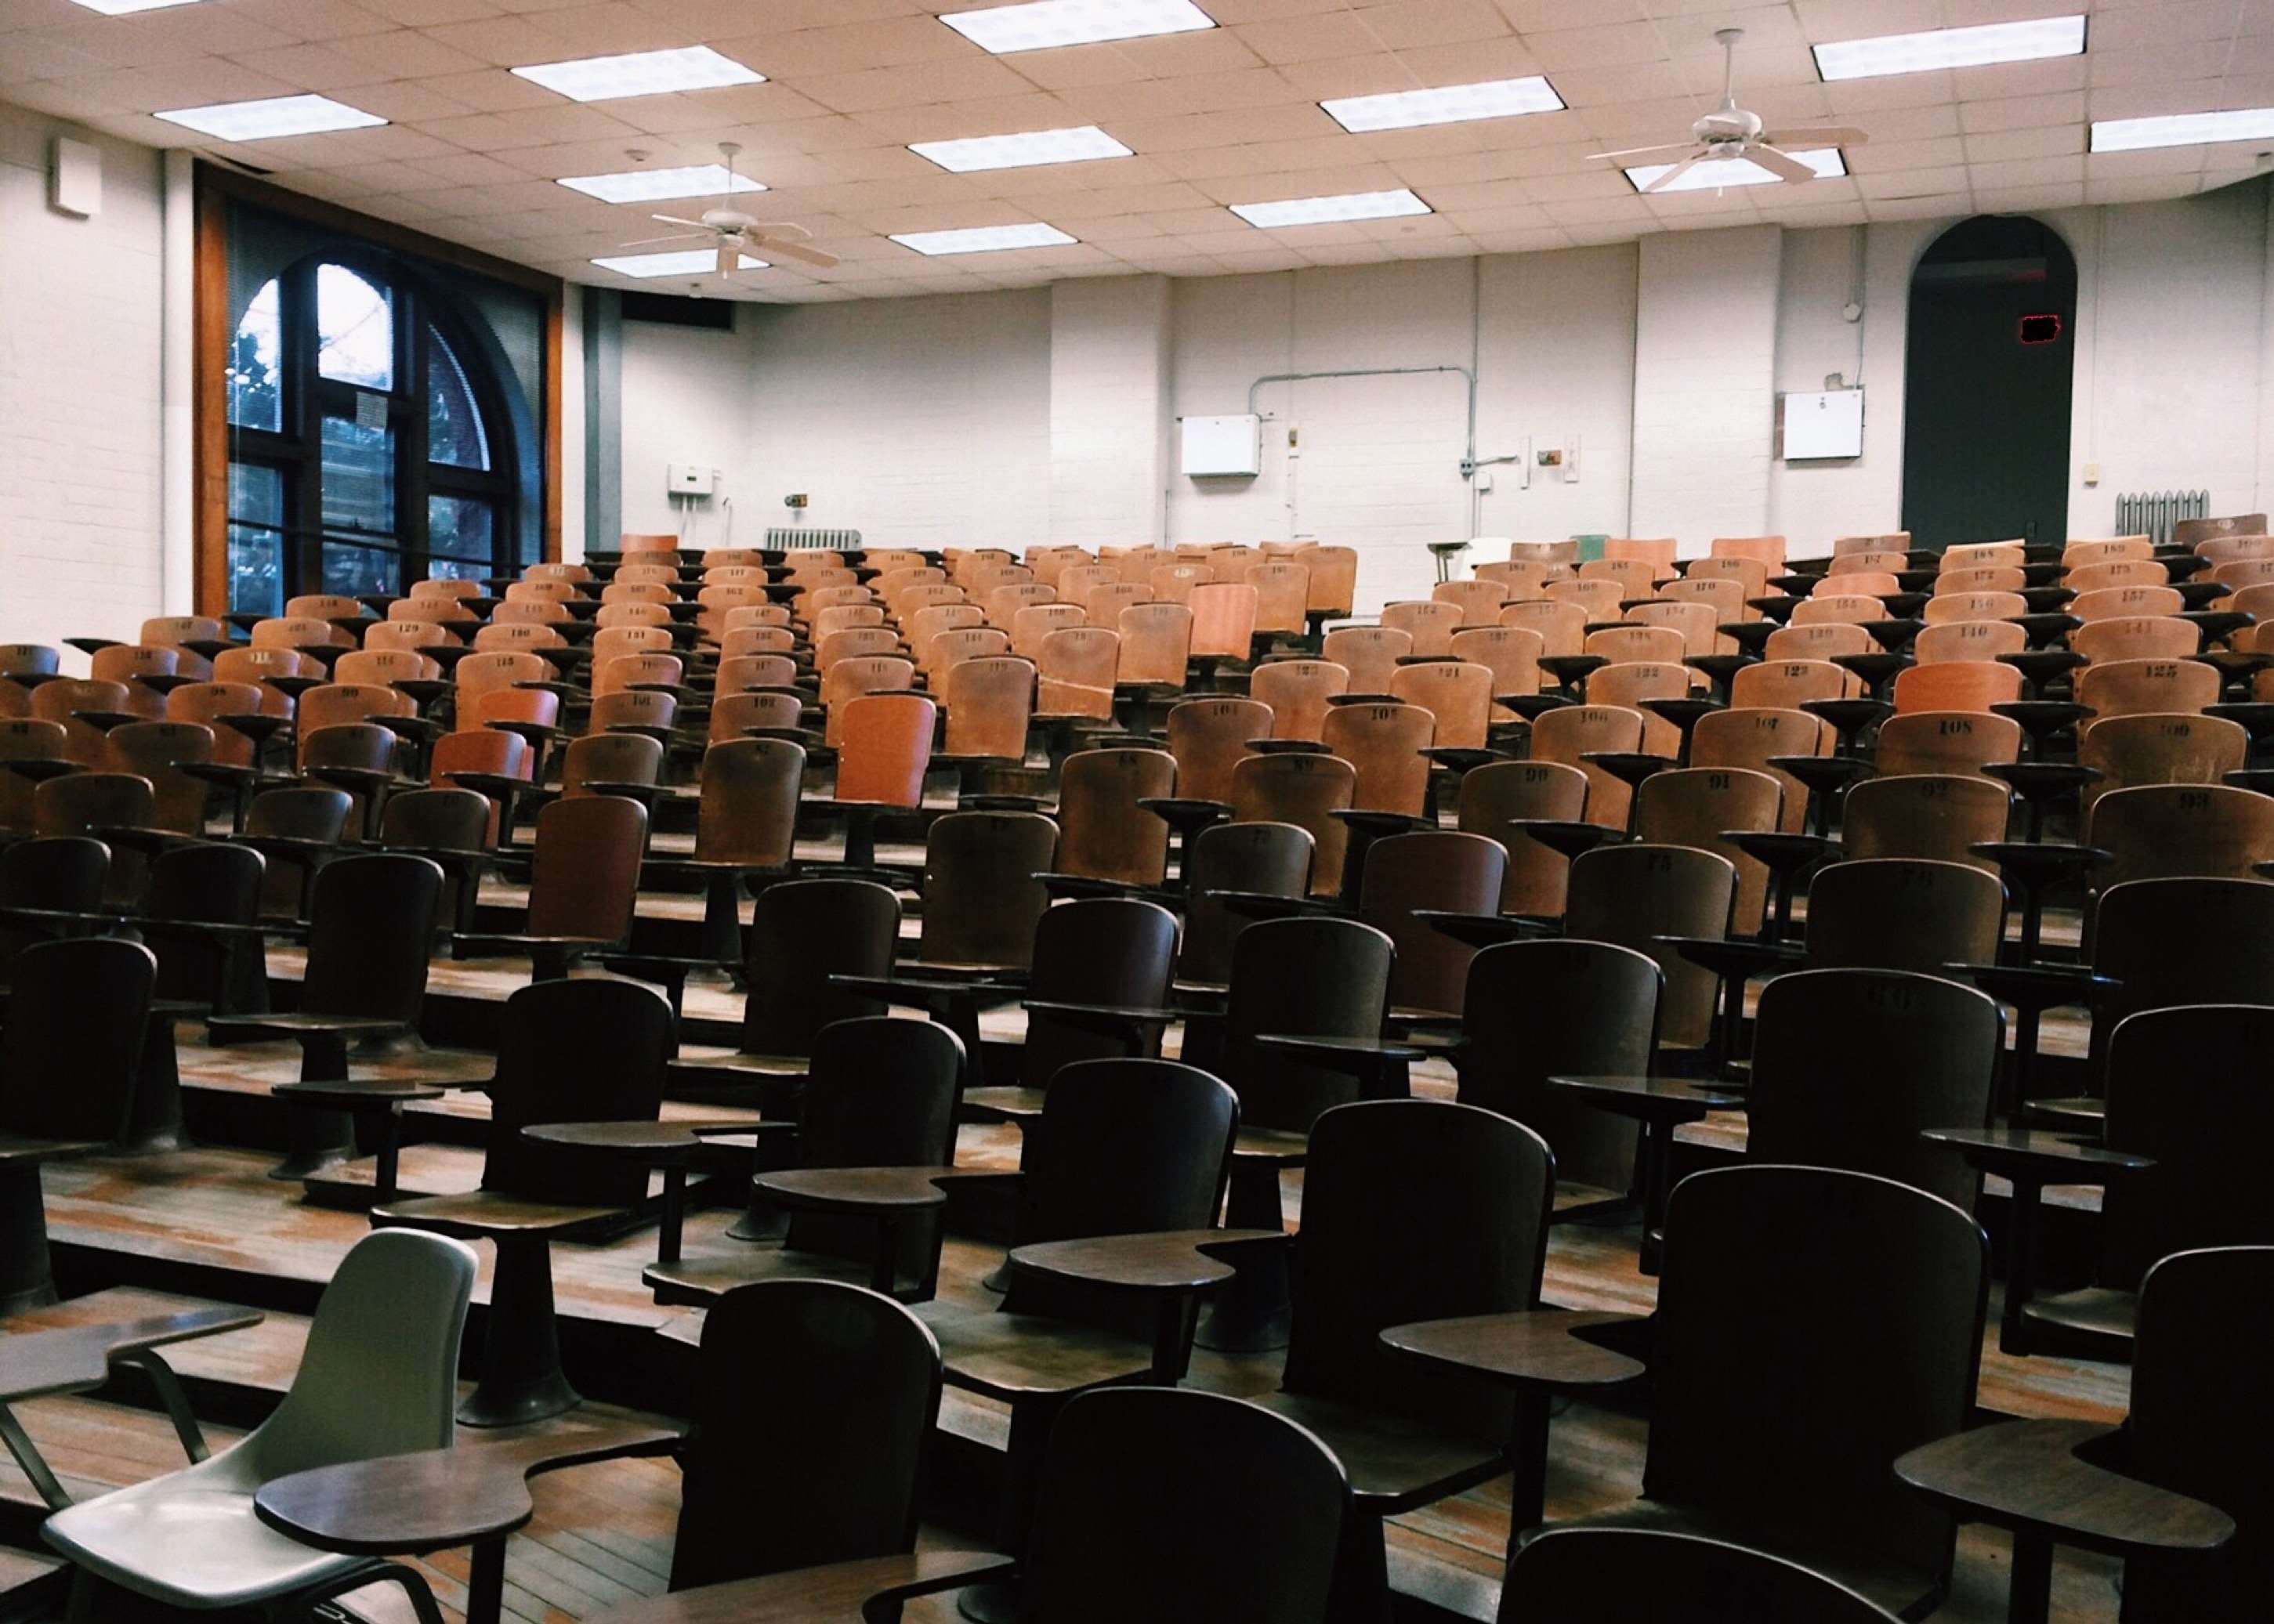 audience, auditorium, chairs, classroom, education, empty, furniture, group, indoors, lecture, lights, room, row, school, seats, seminar, theater, university, wood, wooden chairs wallpaper. Mocah.org HD Desktop Wallpaper